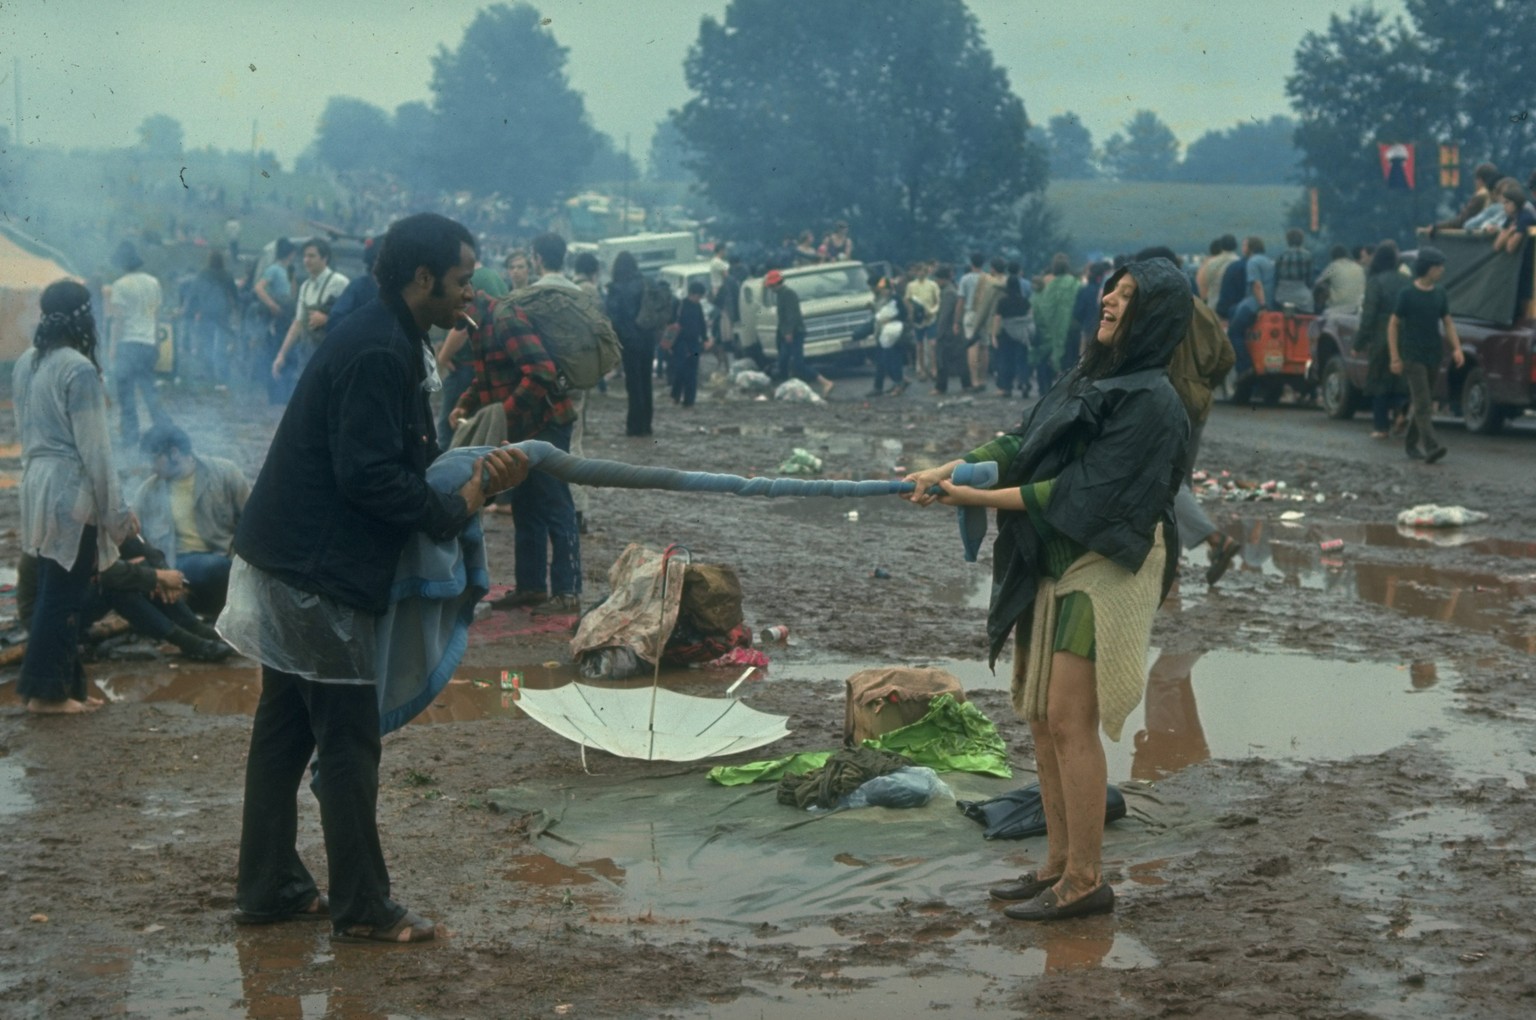 NEW YORK, UNITED STATES - AUGUST 1969: Couple twisting a blanket between them, probably trying to squeeze out the water, during the Woodstock Music &amp; Art Fair. (Photo by John Dominis/The LIFE Pict ...